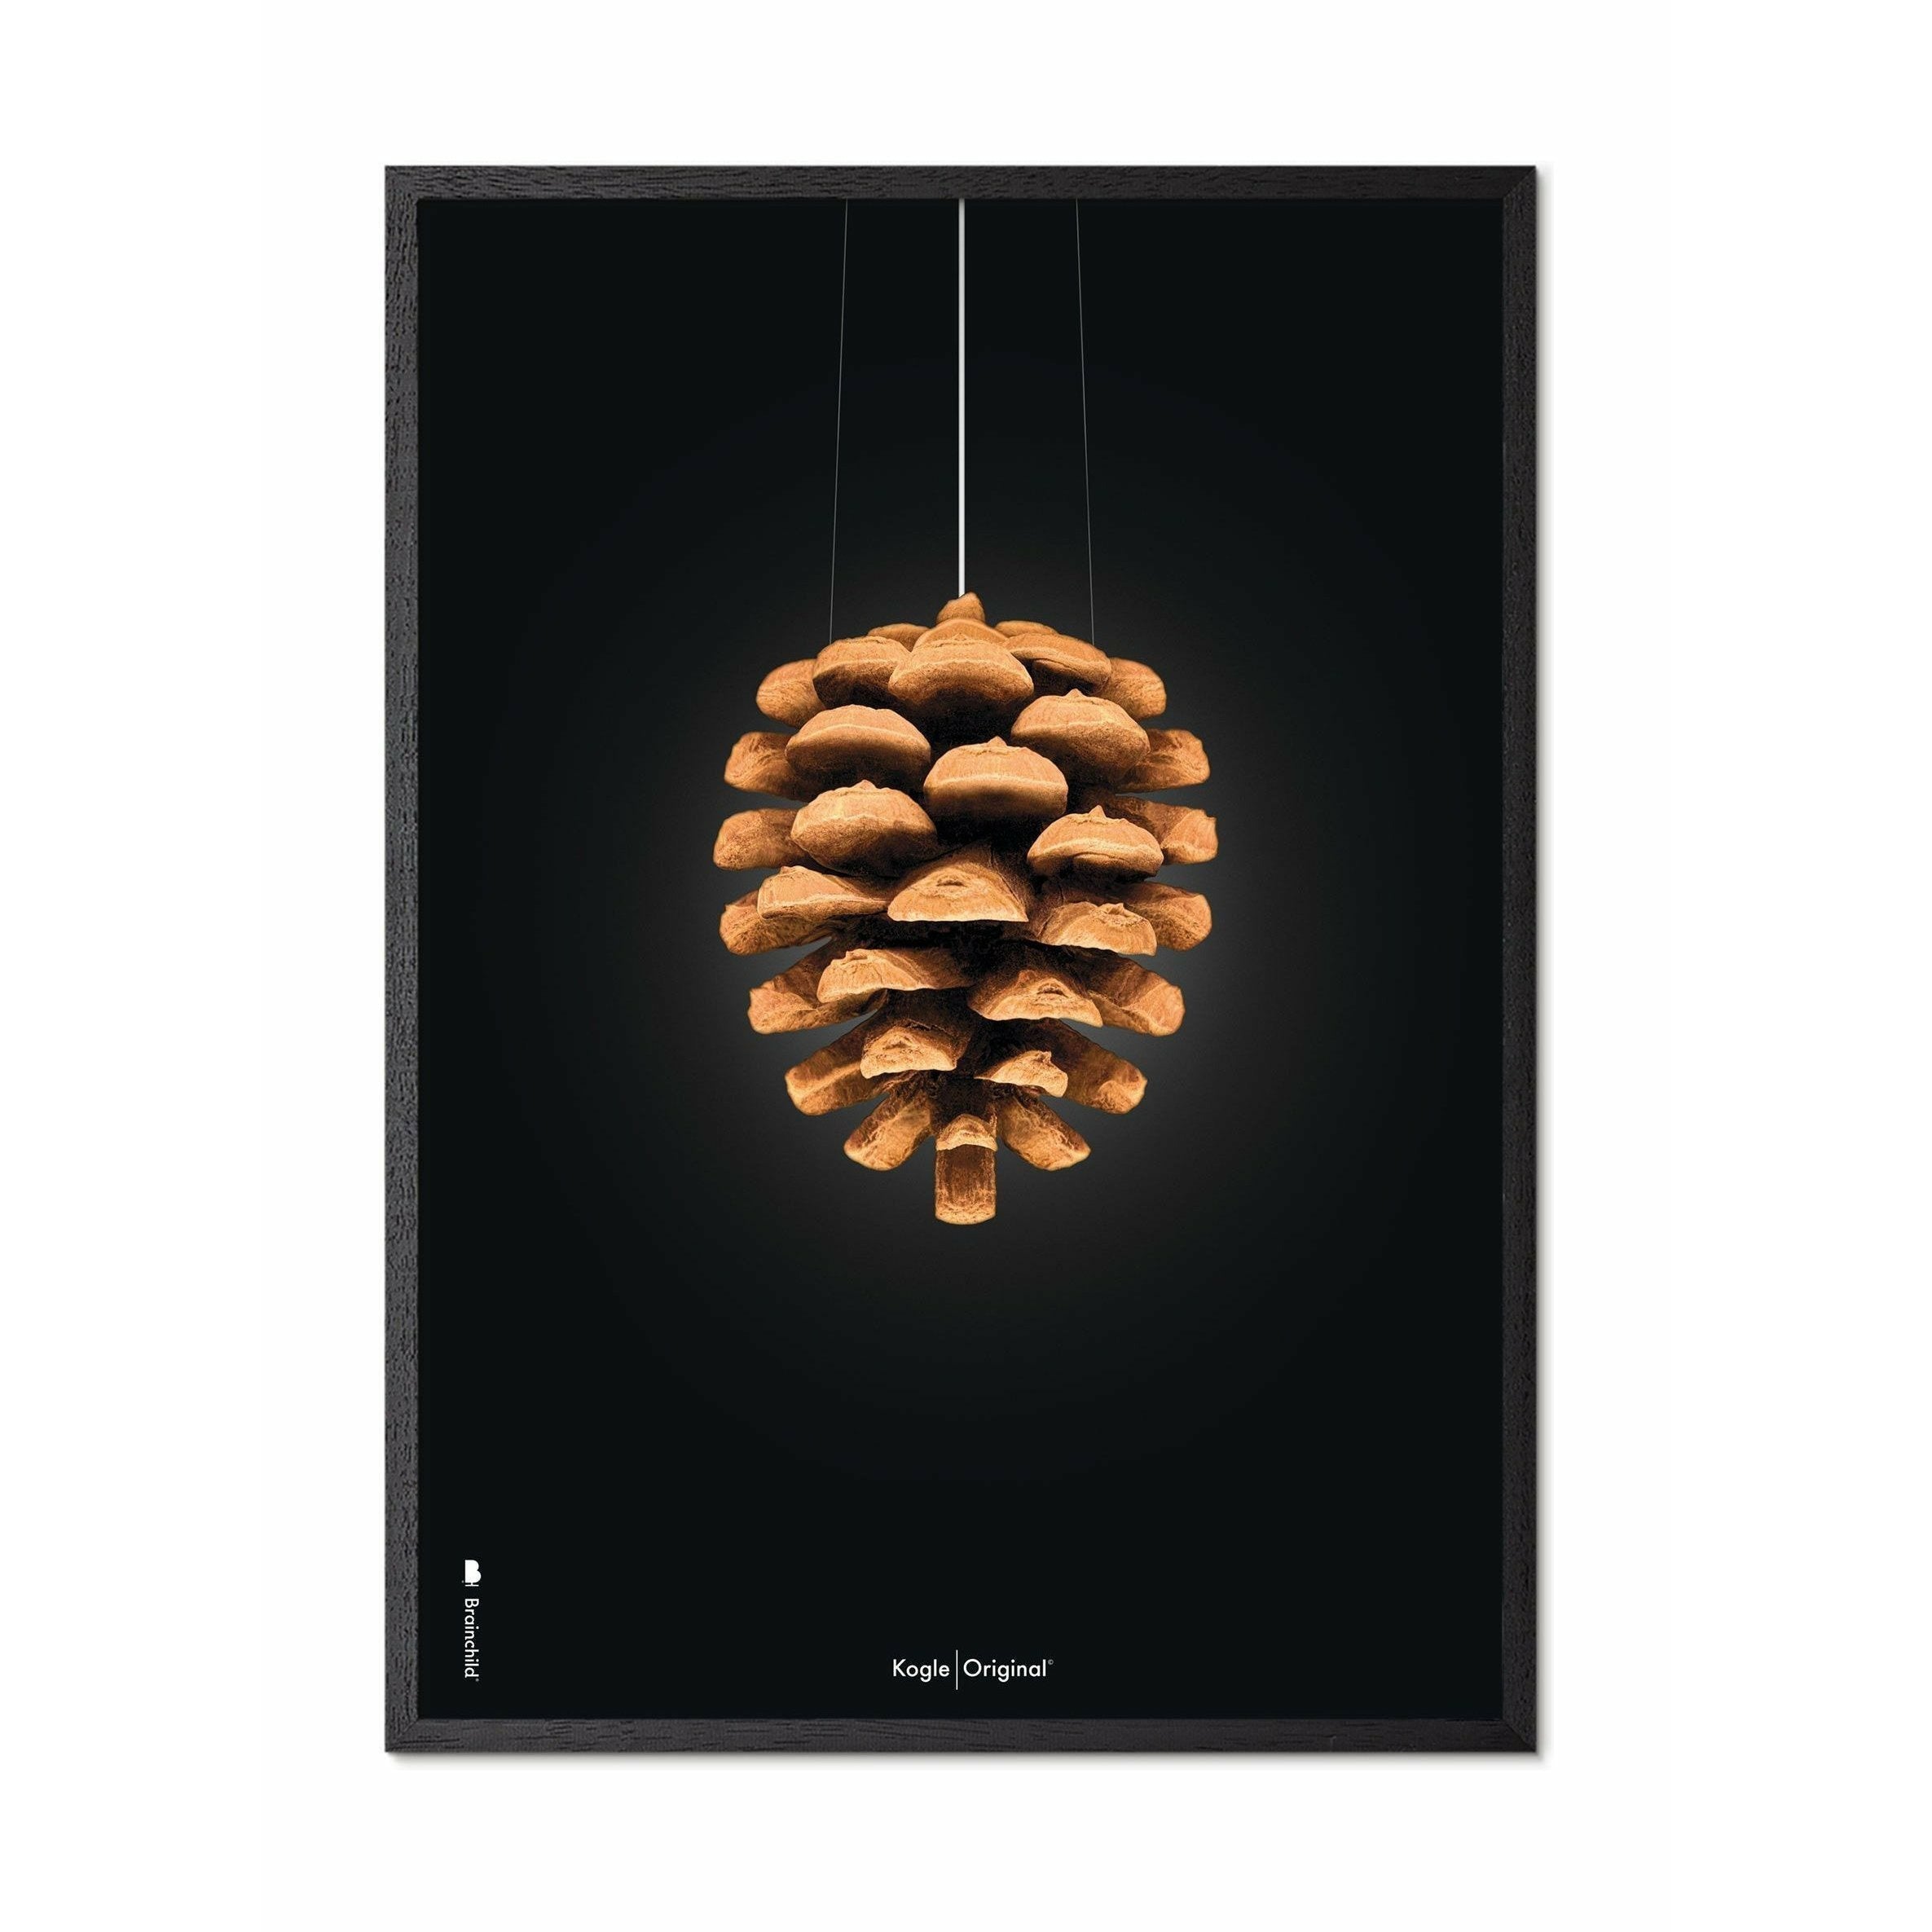 Brainchild Pine Cone Classic Poster, Frame In Black Lacquered Wood 50x70 Cm, Black Background